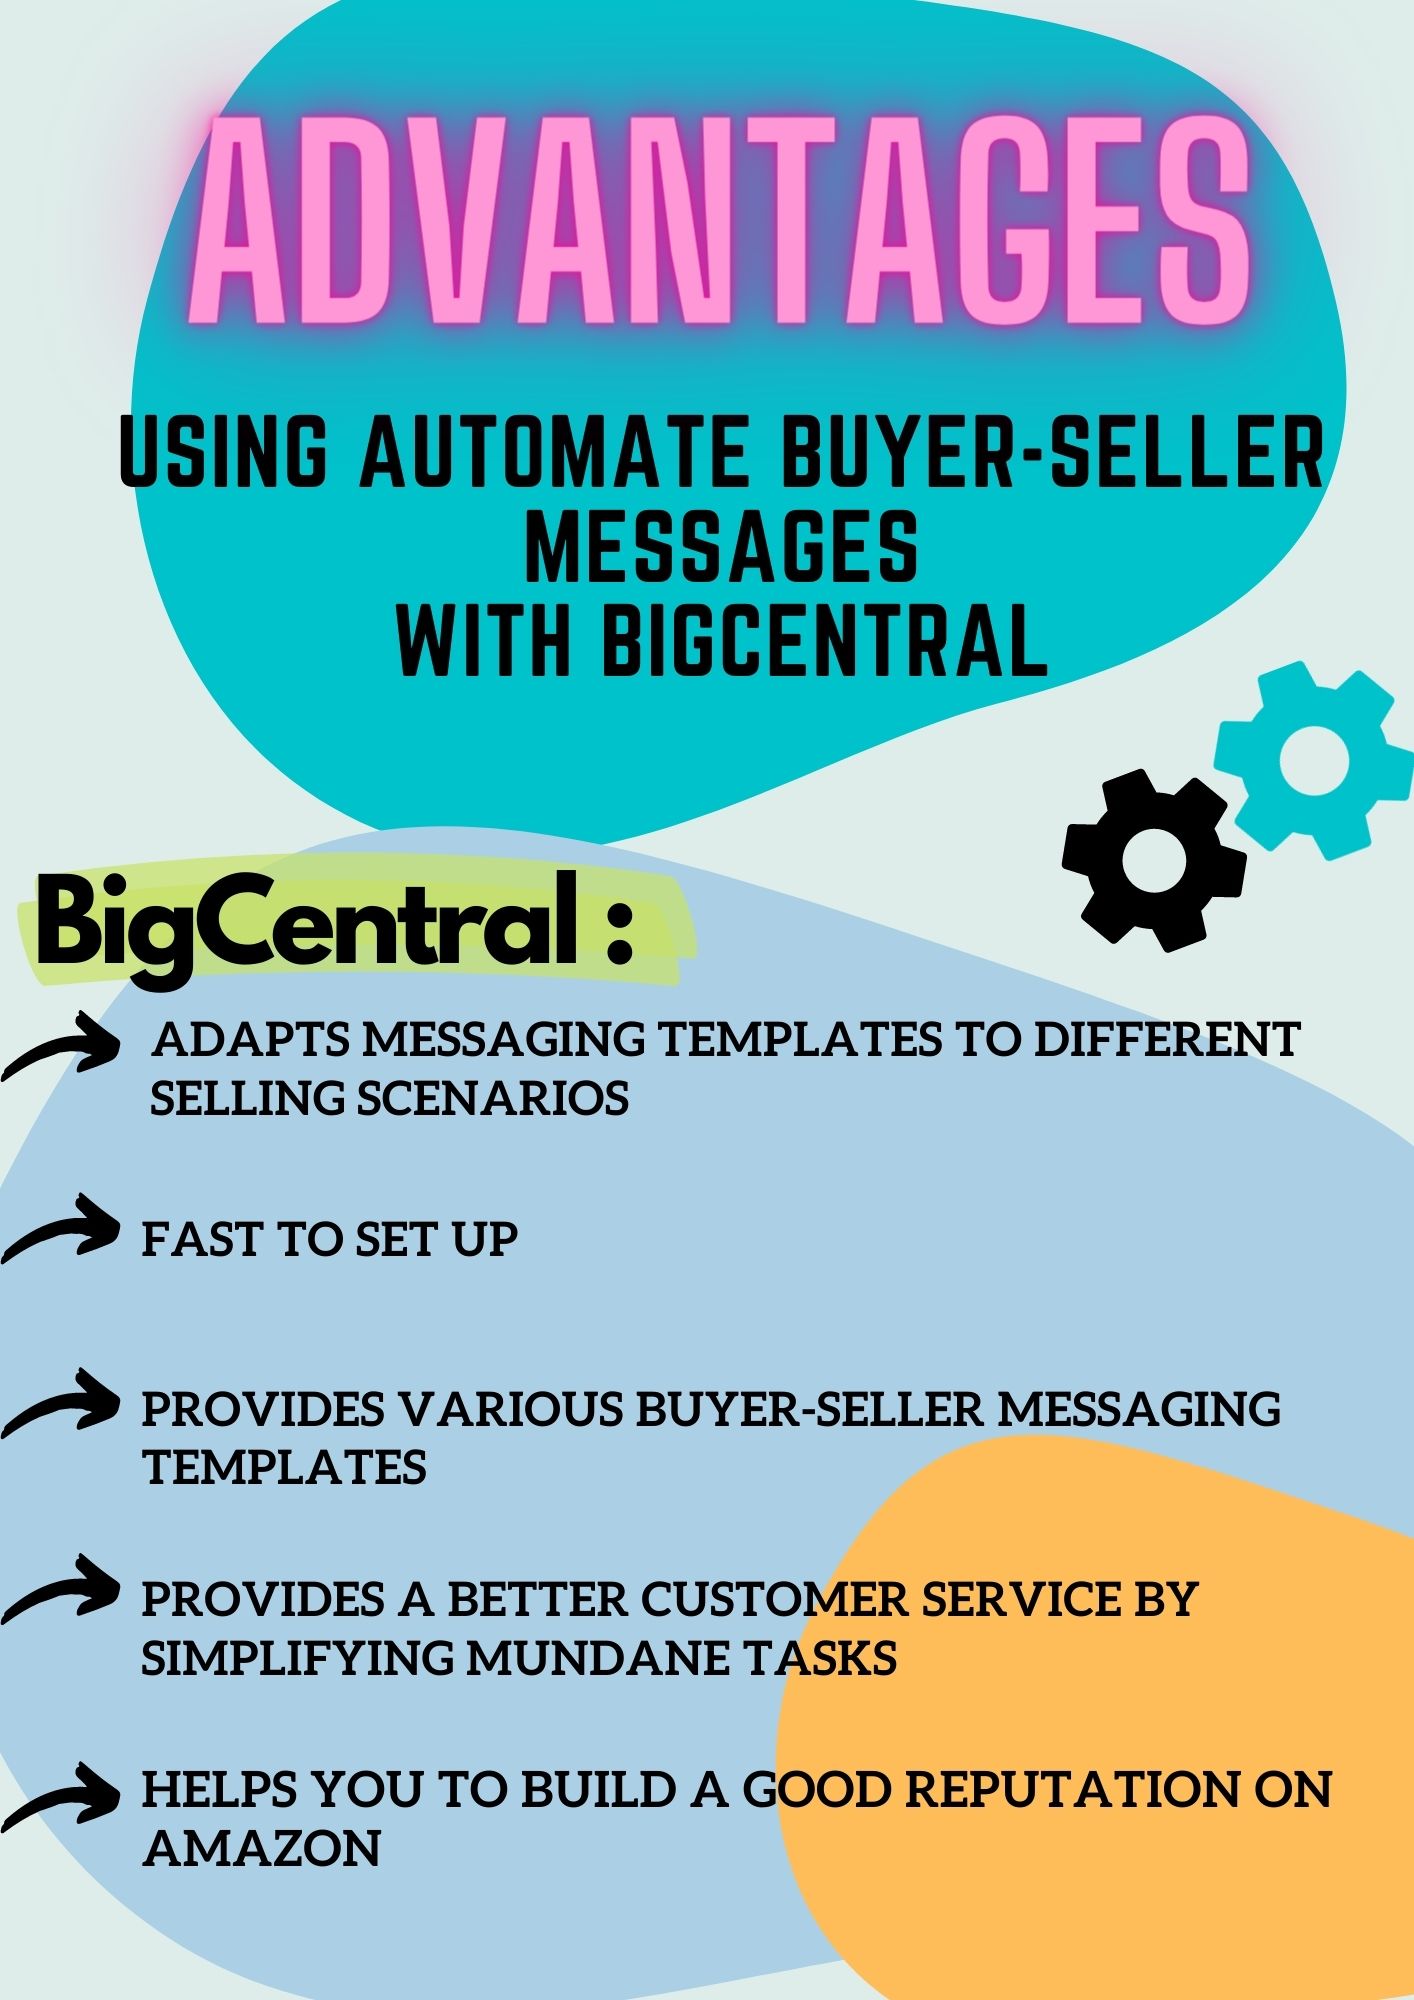 Advantages to Automate Buyer-Seller Messages With BigCentral (7)